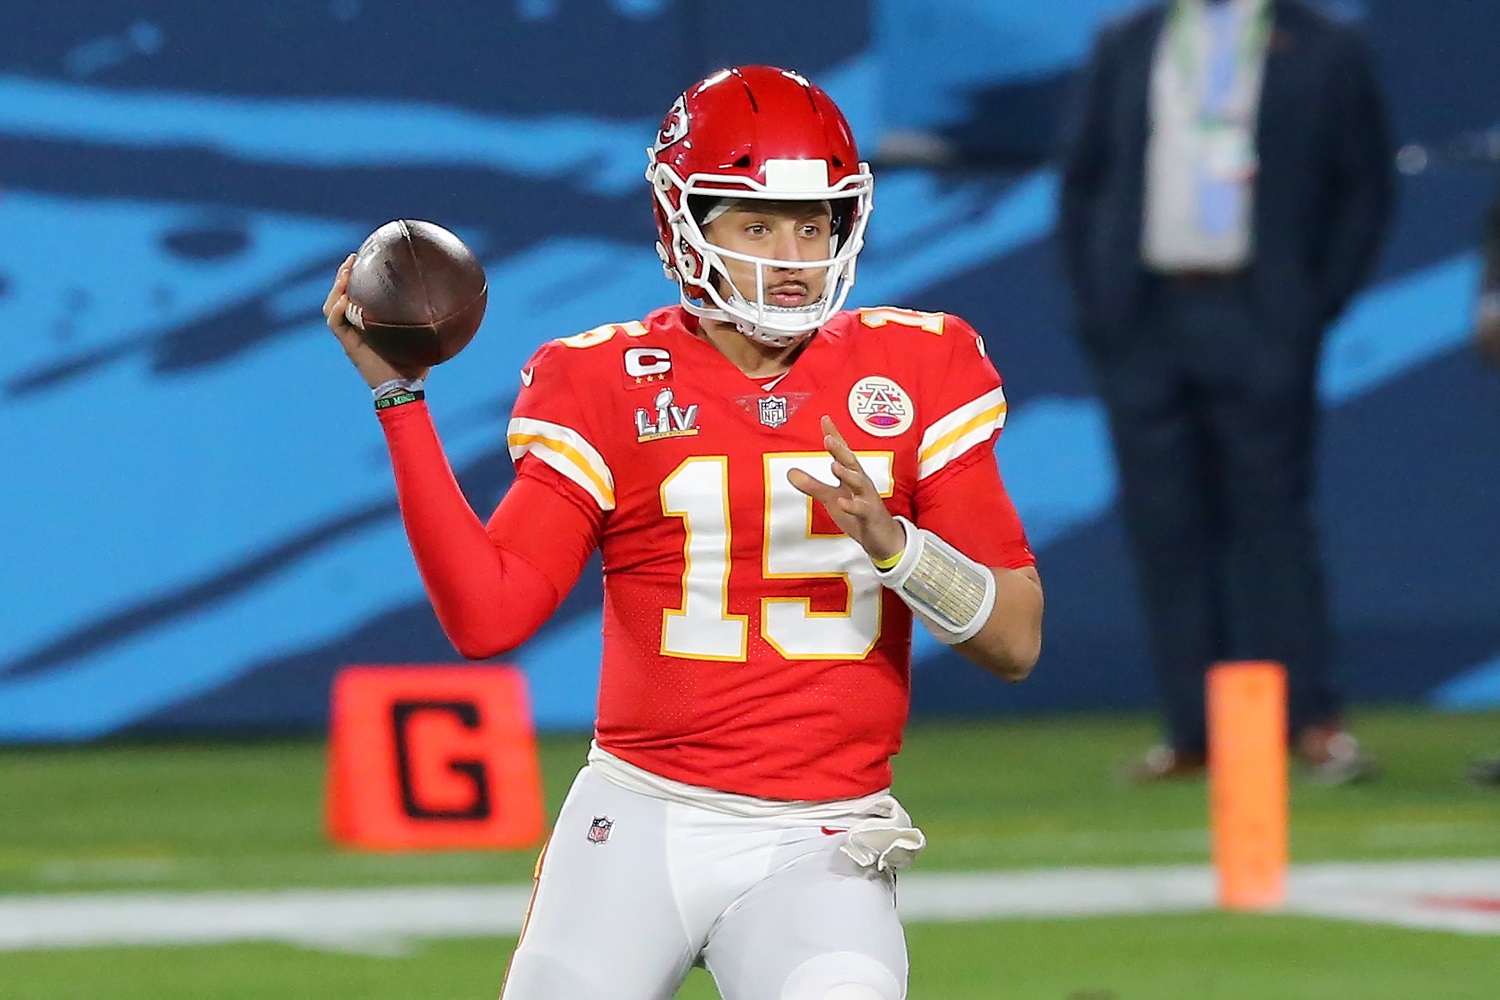 Patrick Mahomes appeared in the past two Super Bowls for the Kansas City Chiefs after the Sn Francisco 49ers missed their chance